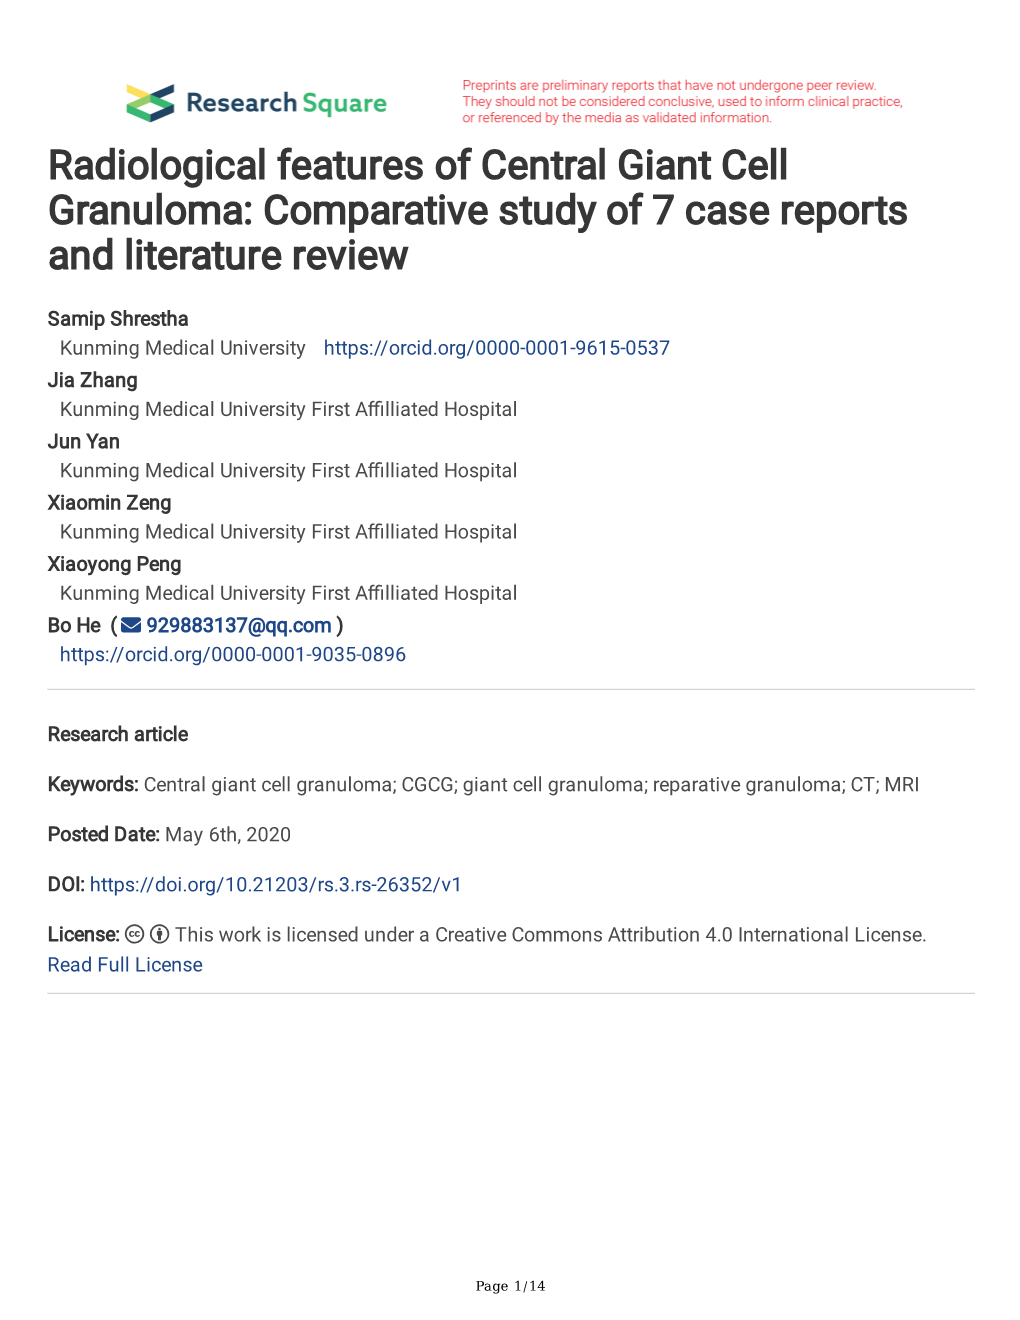 Radiological Features of Central Giant Cell Granuloma: Comparative Study of 7 Case Reports and Literature Review